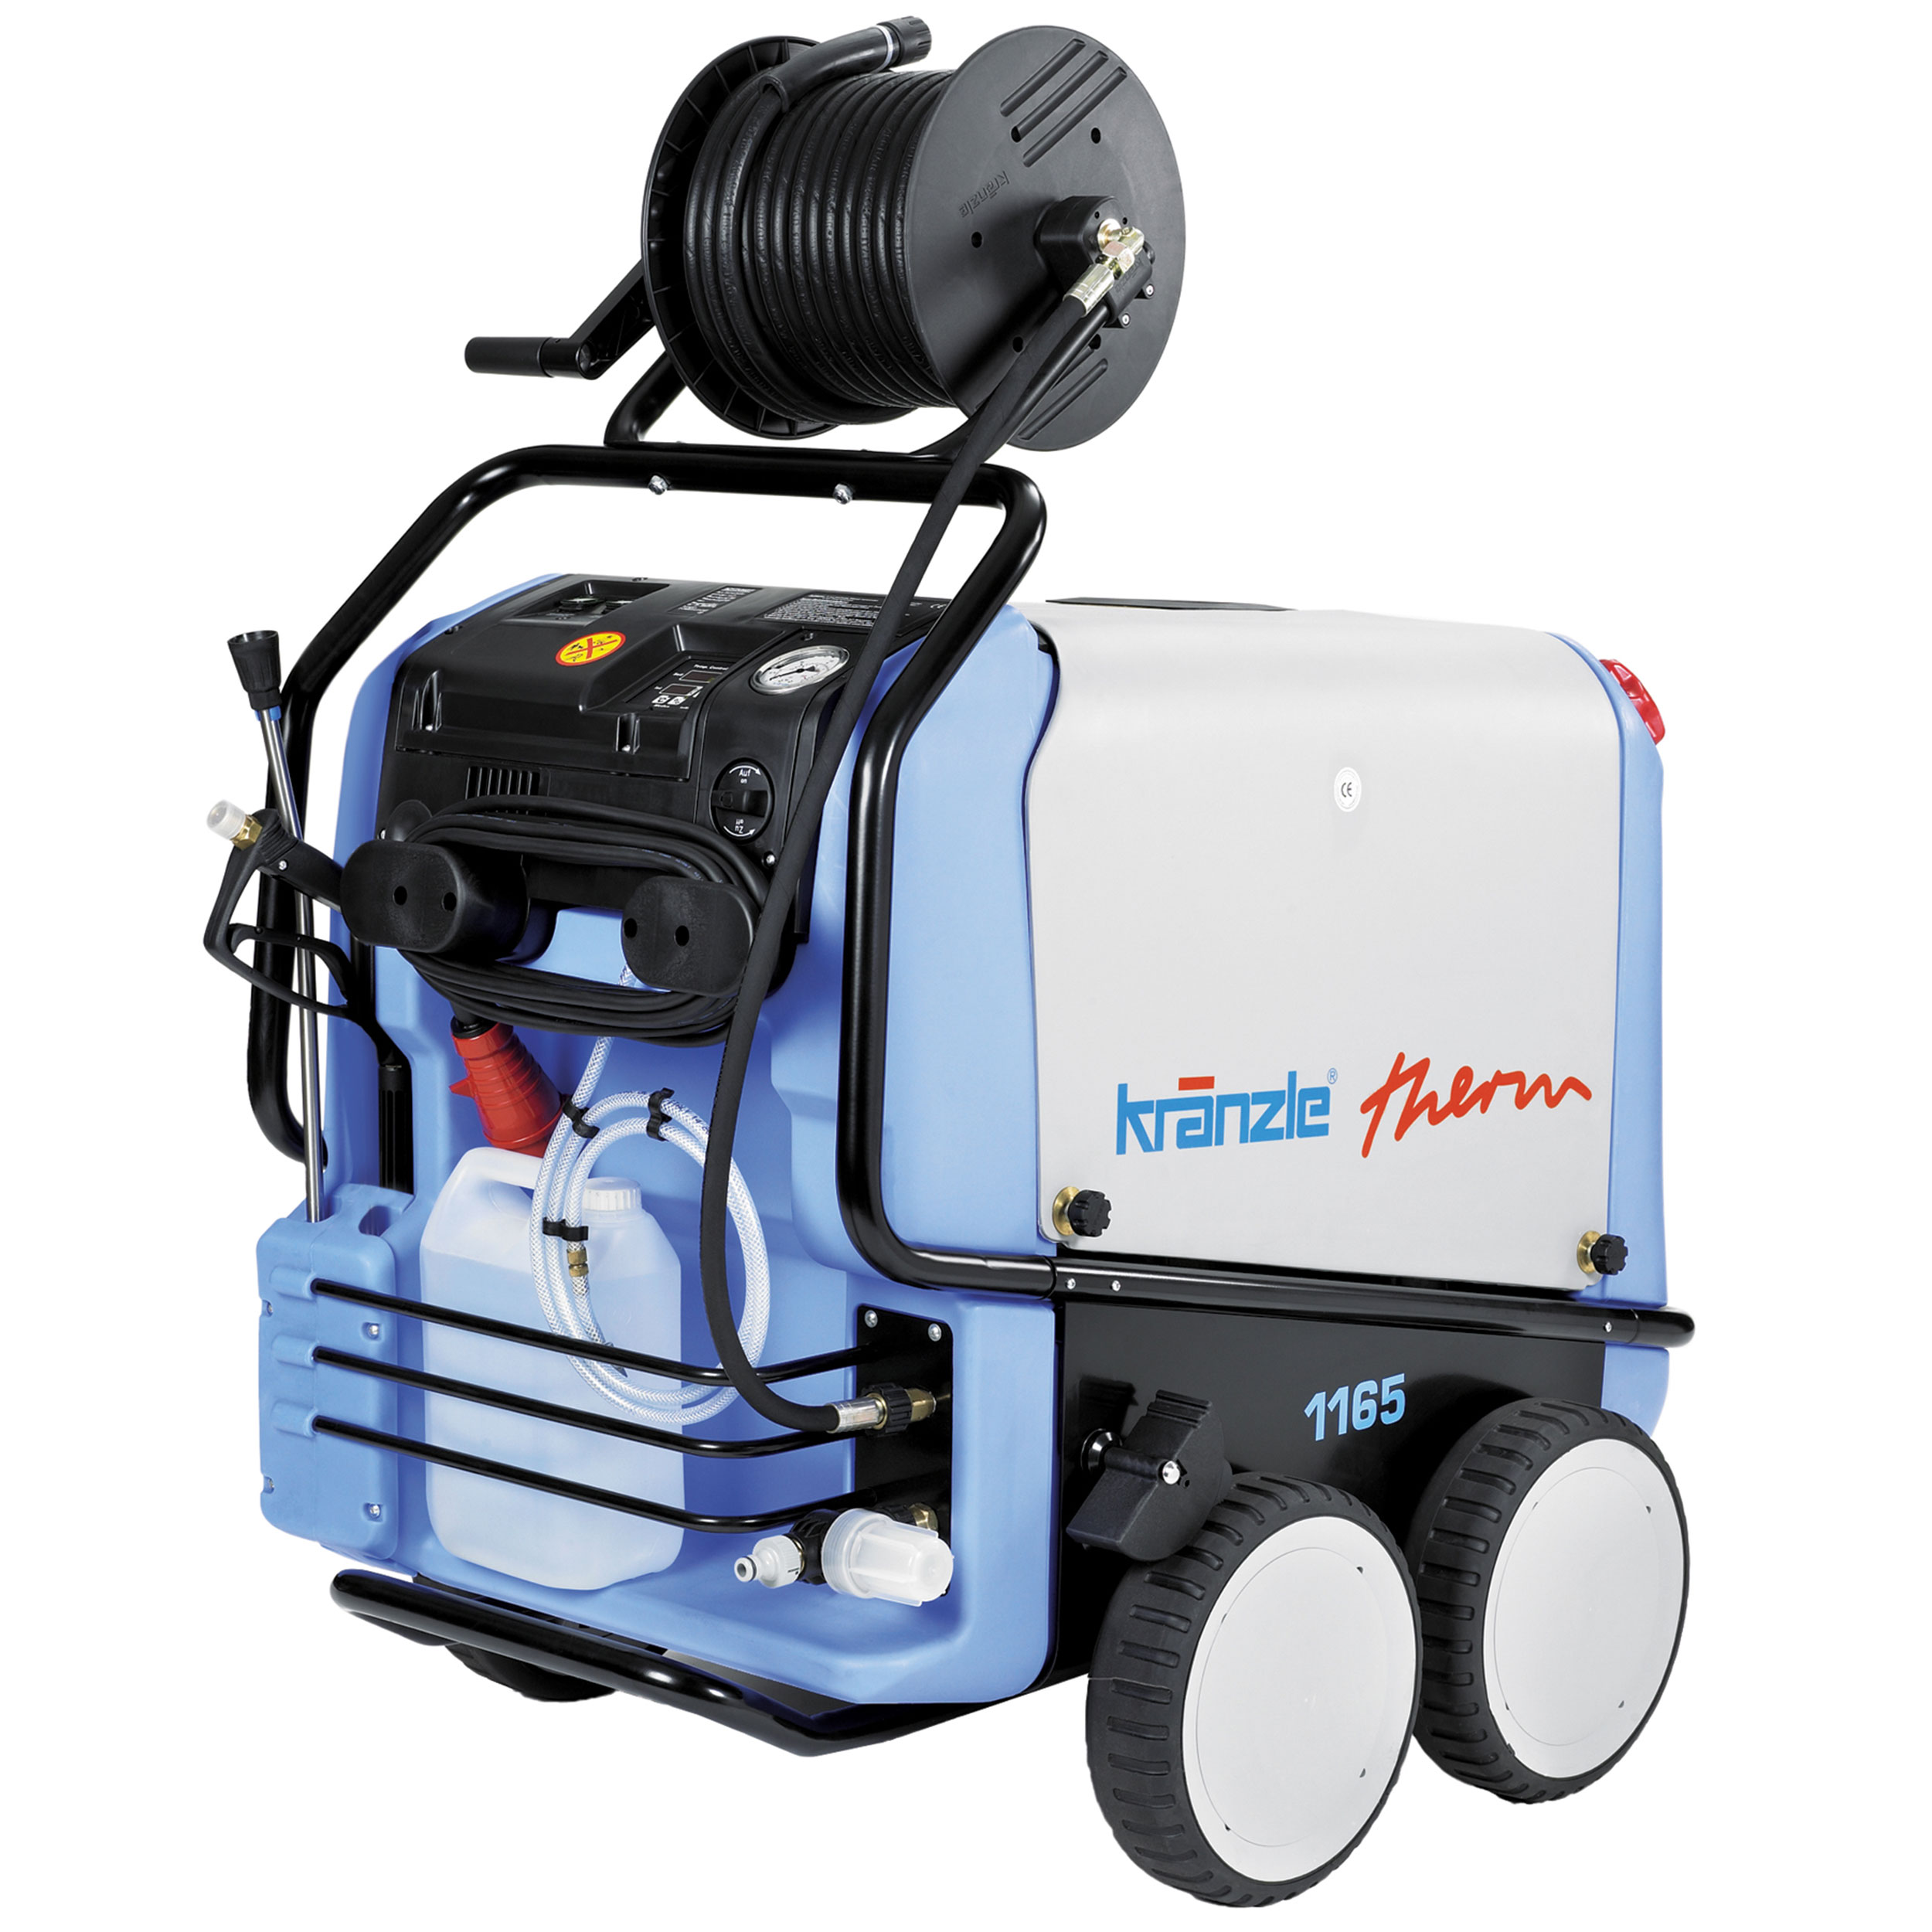 Therm 1165tst Pressure Washer, Hot Water, 220v, 25a, 3ph